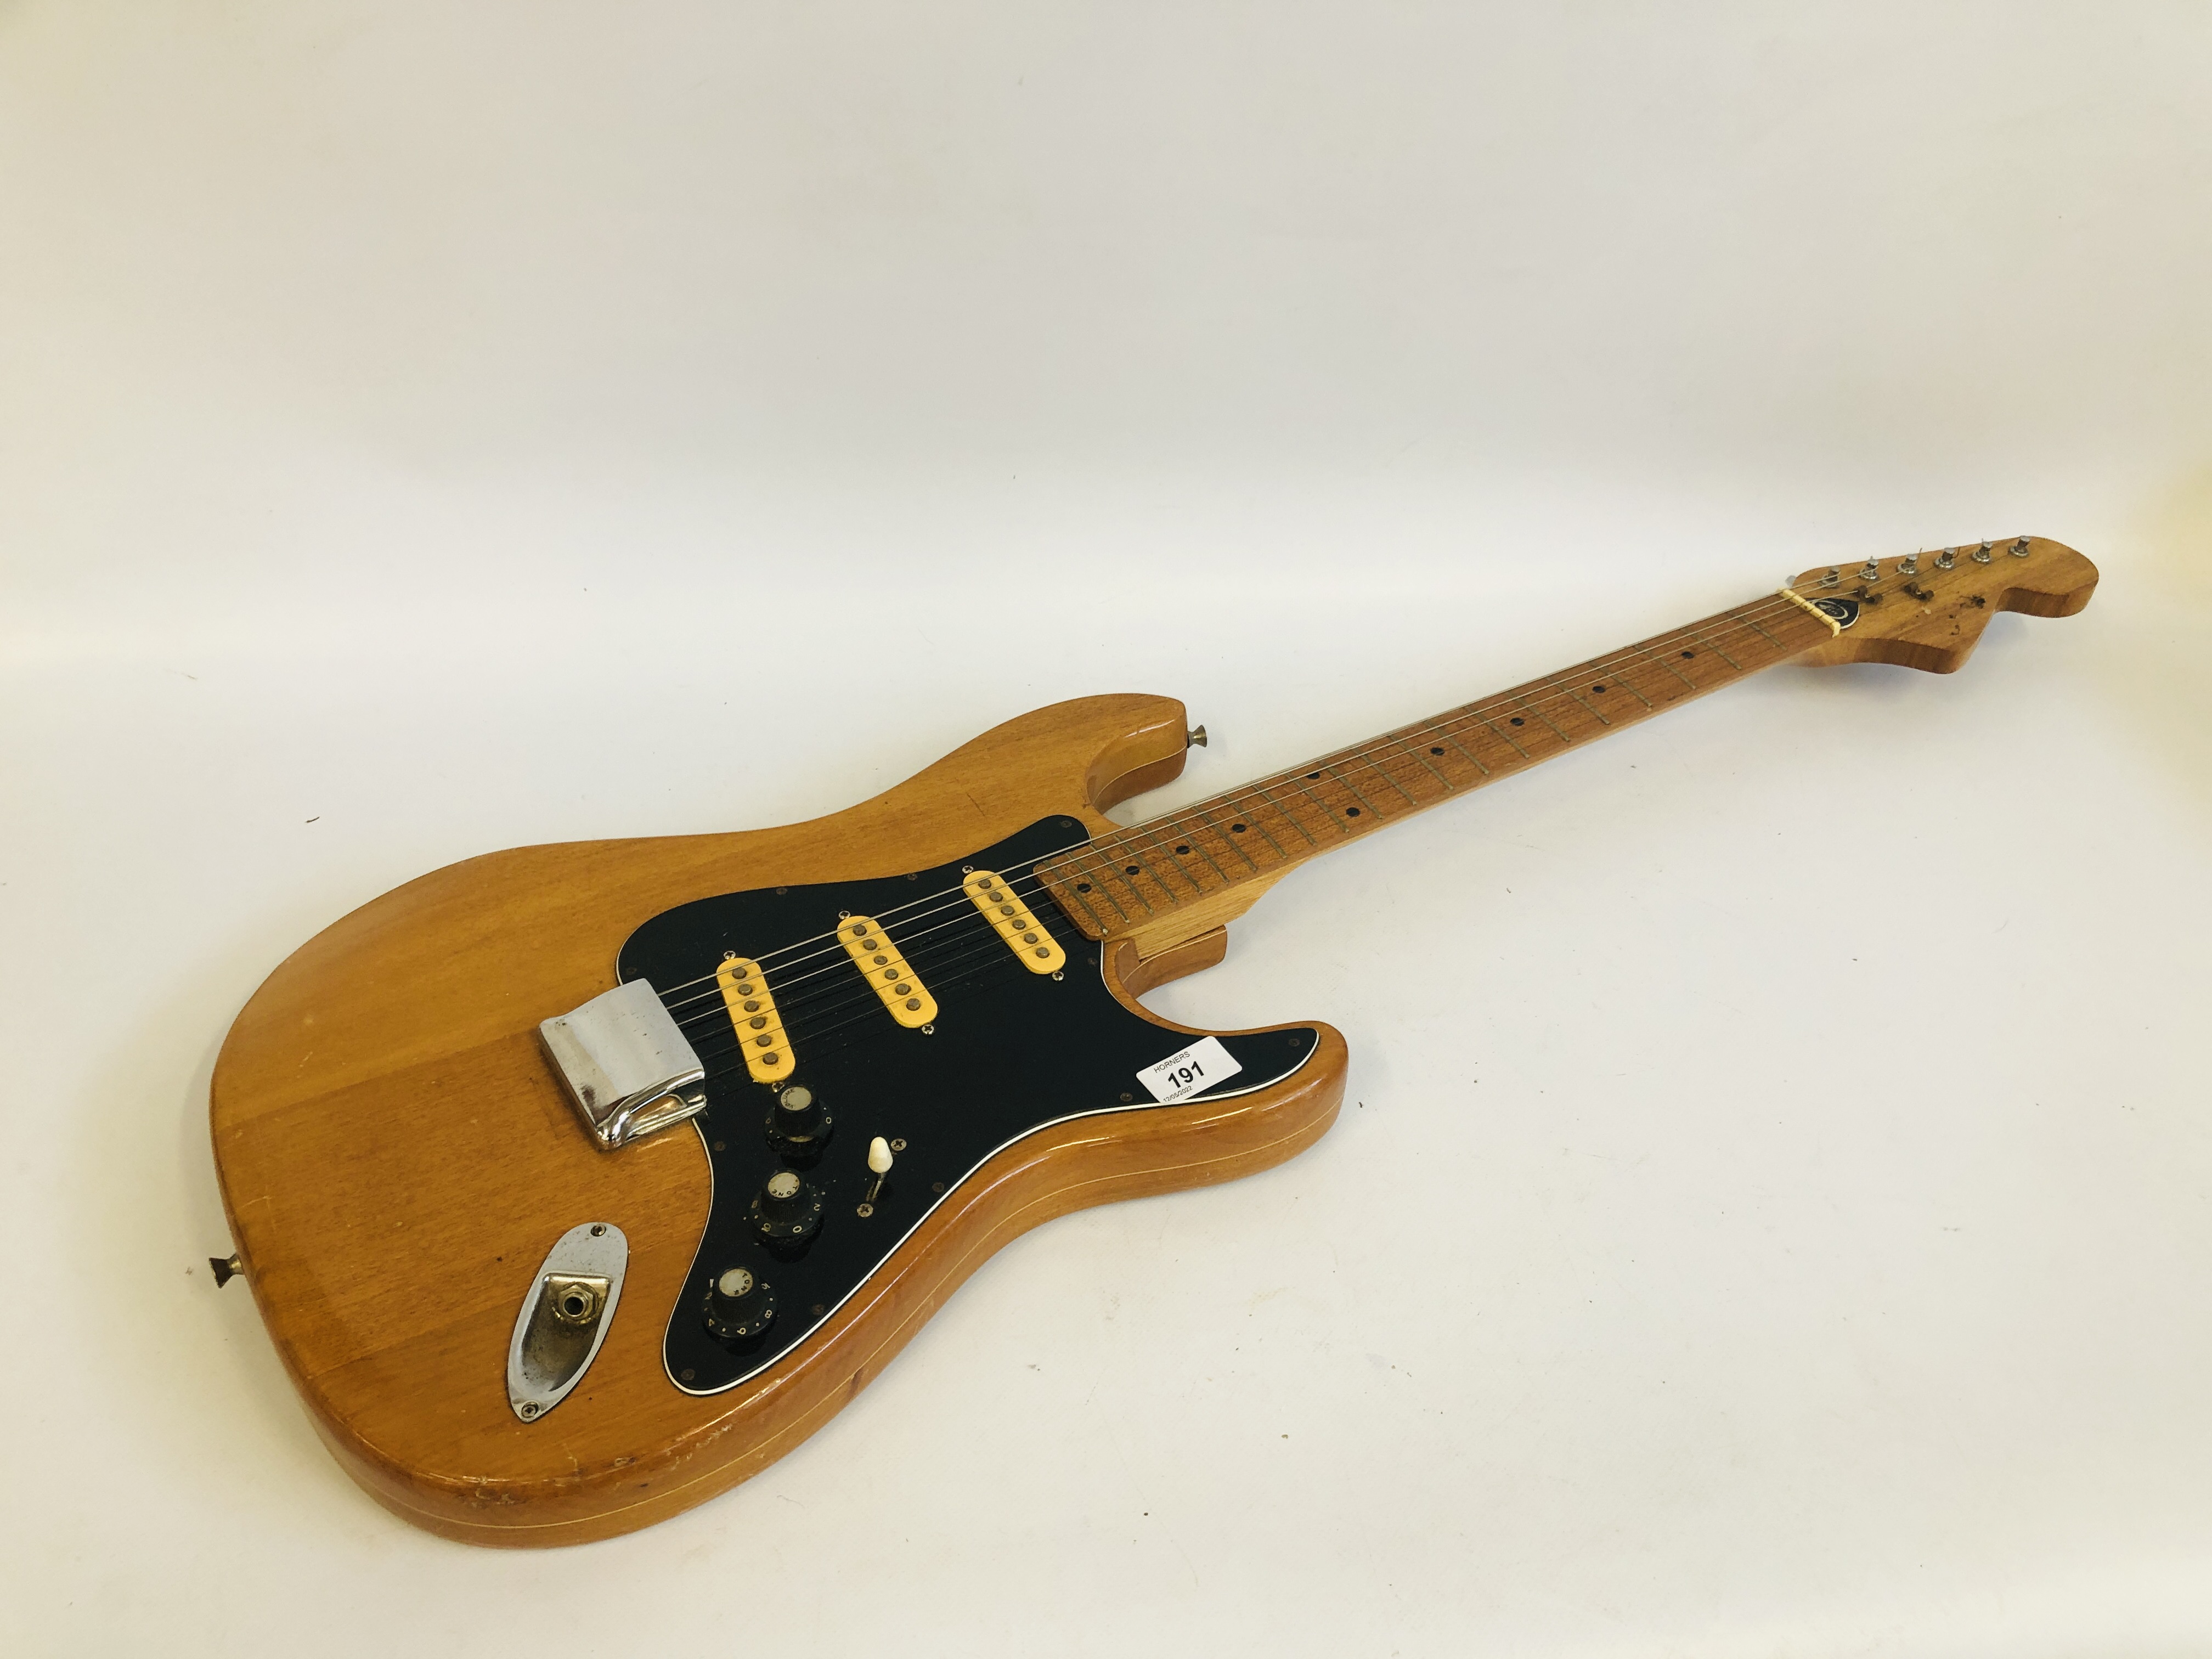 A KAY ELECTRIC GUITAR IN WOOD LAMINATE FINISH ALONG WITH TRAVEL CASE (A/F)